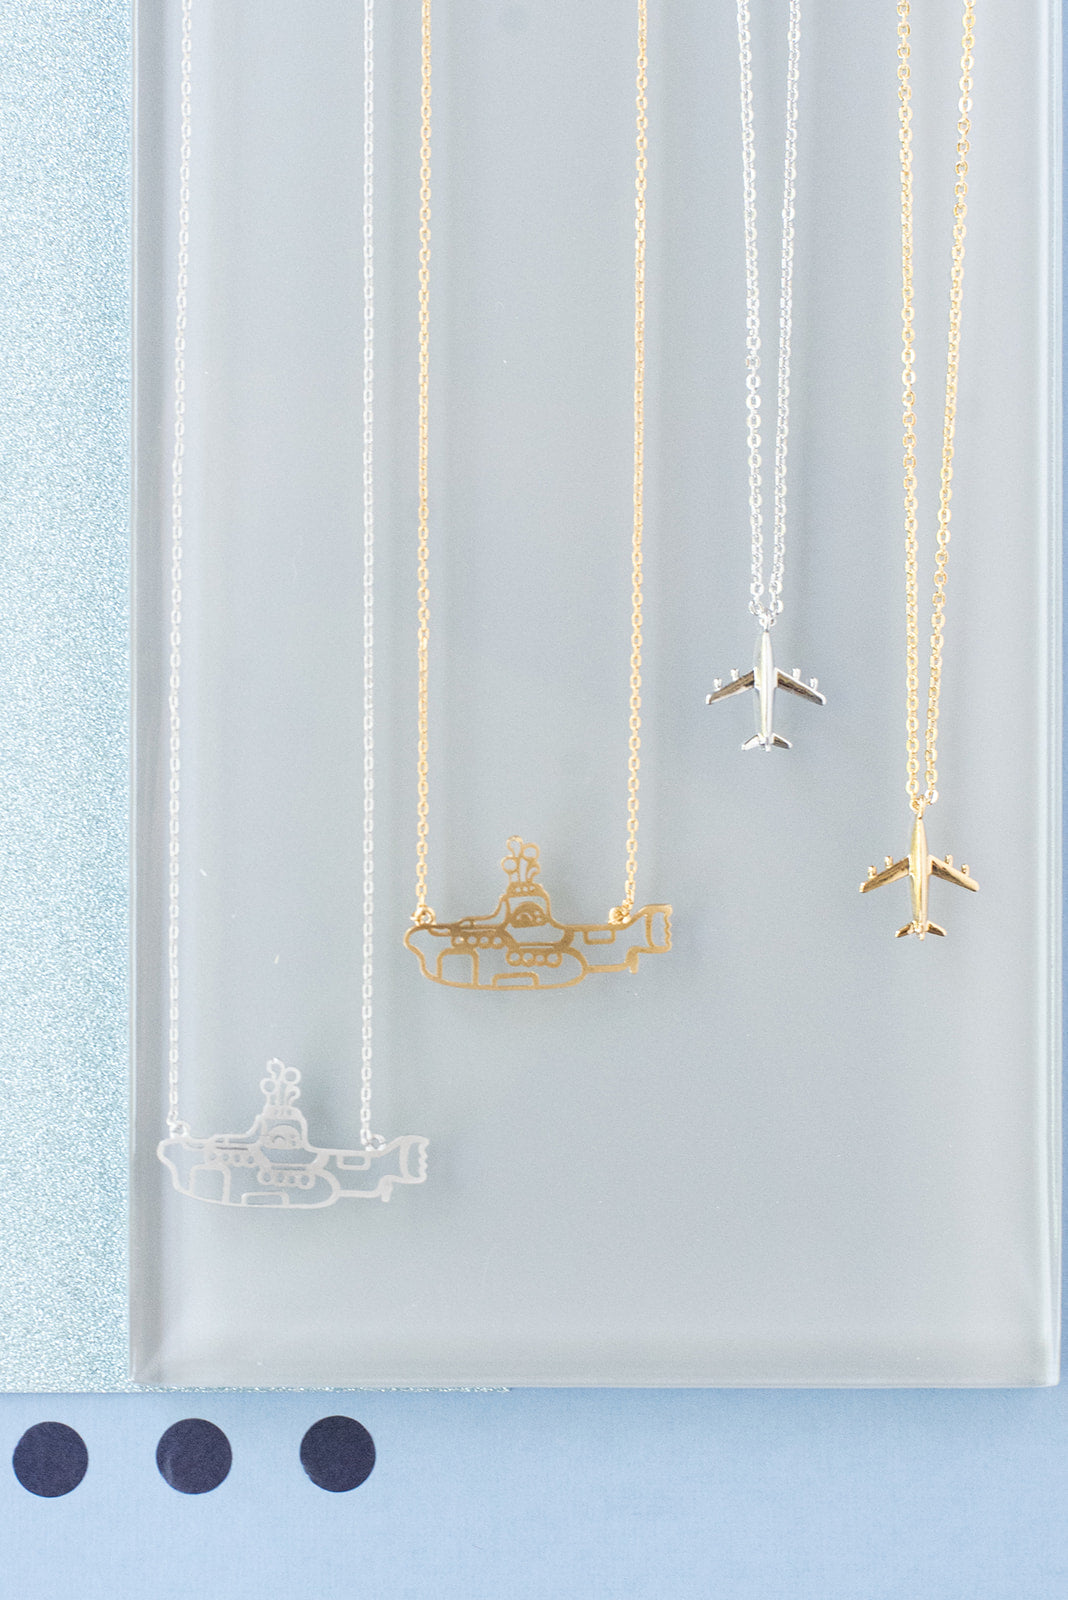 Amazon.com : Aviation and Airplane Stamp Silhouettes Womens Diamond  Necklaces Alloy Pendants Trendy Dainty Jewelry Gifts Golden-Style : Sports  & Outdoors